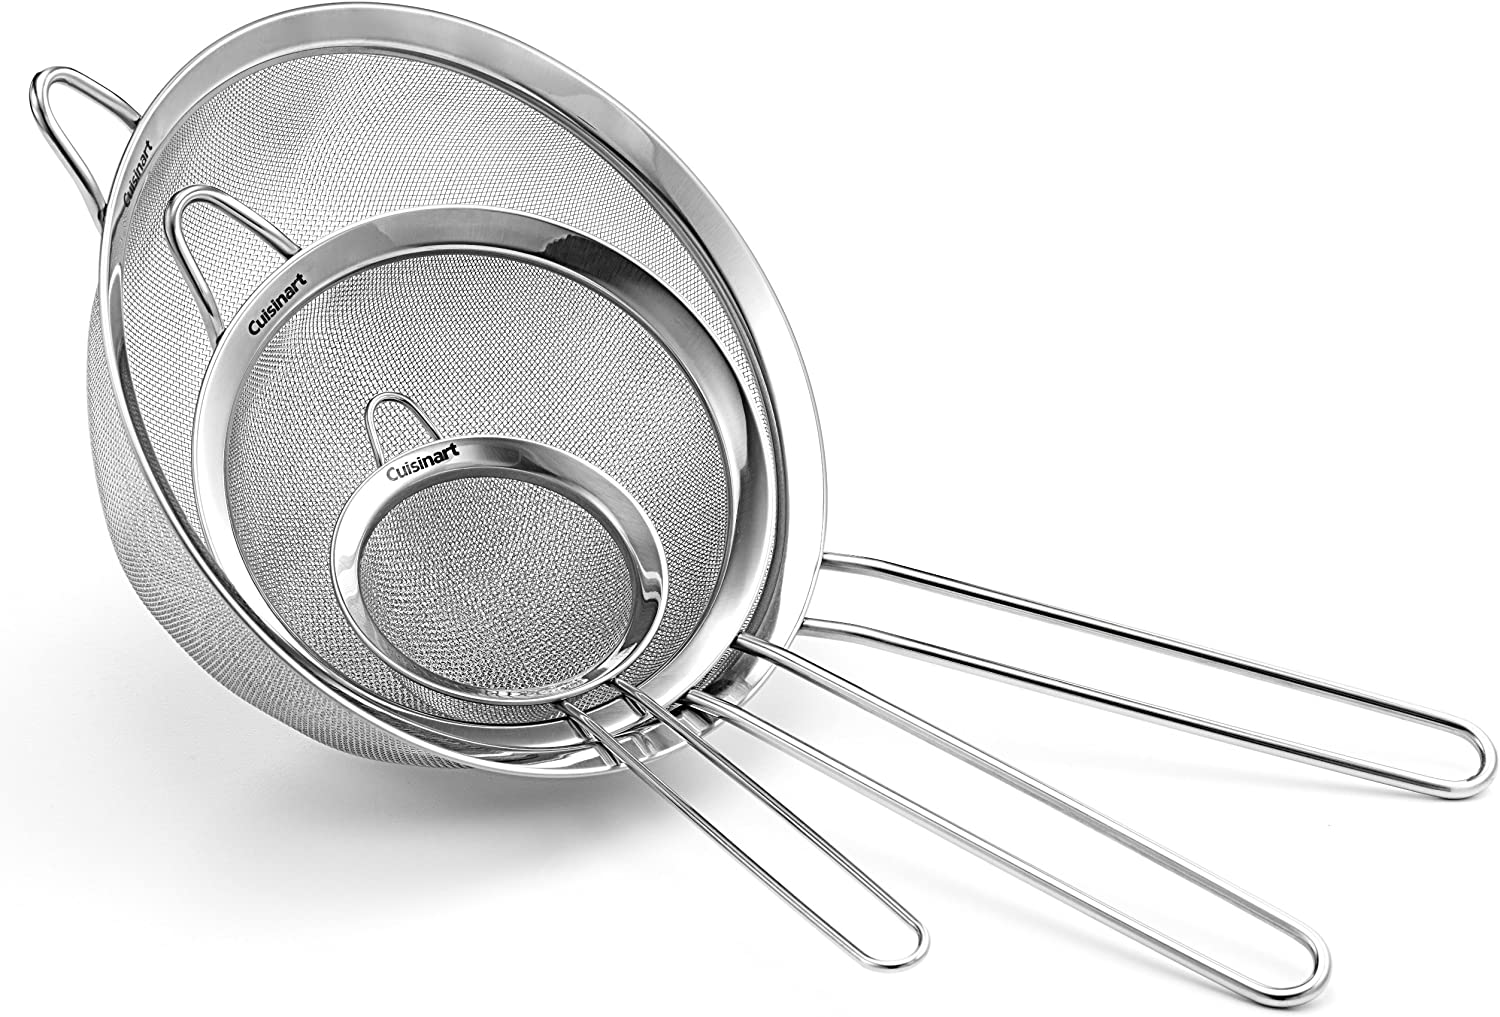 Strainer vs Colander: Which is the Better Kitchen Tool?